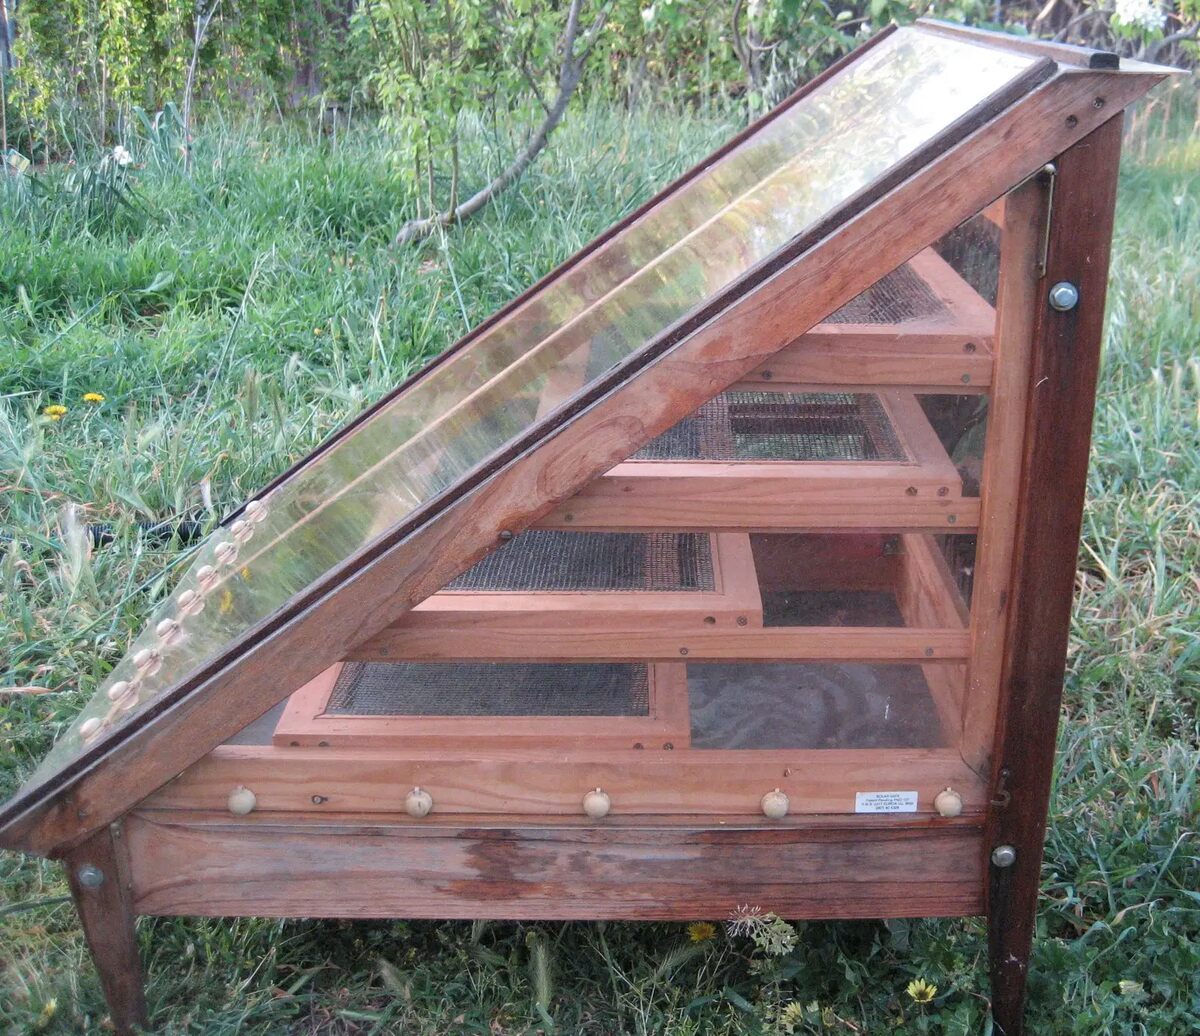 How To Make A Solar Dehydrator